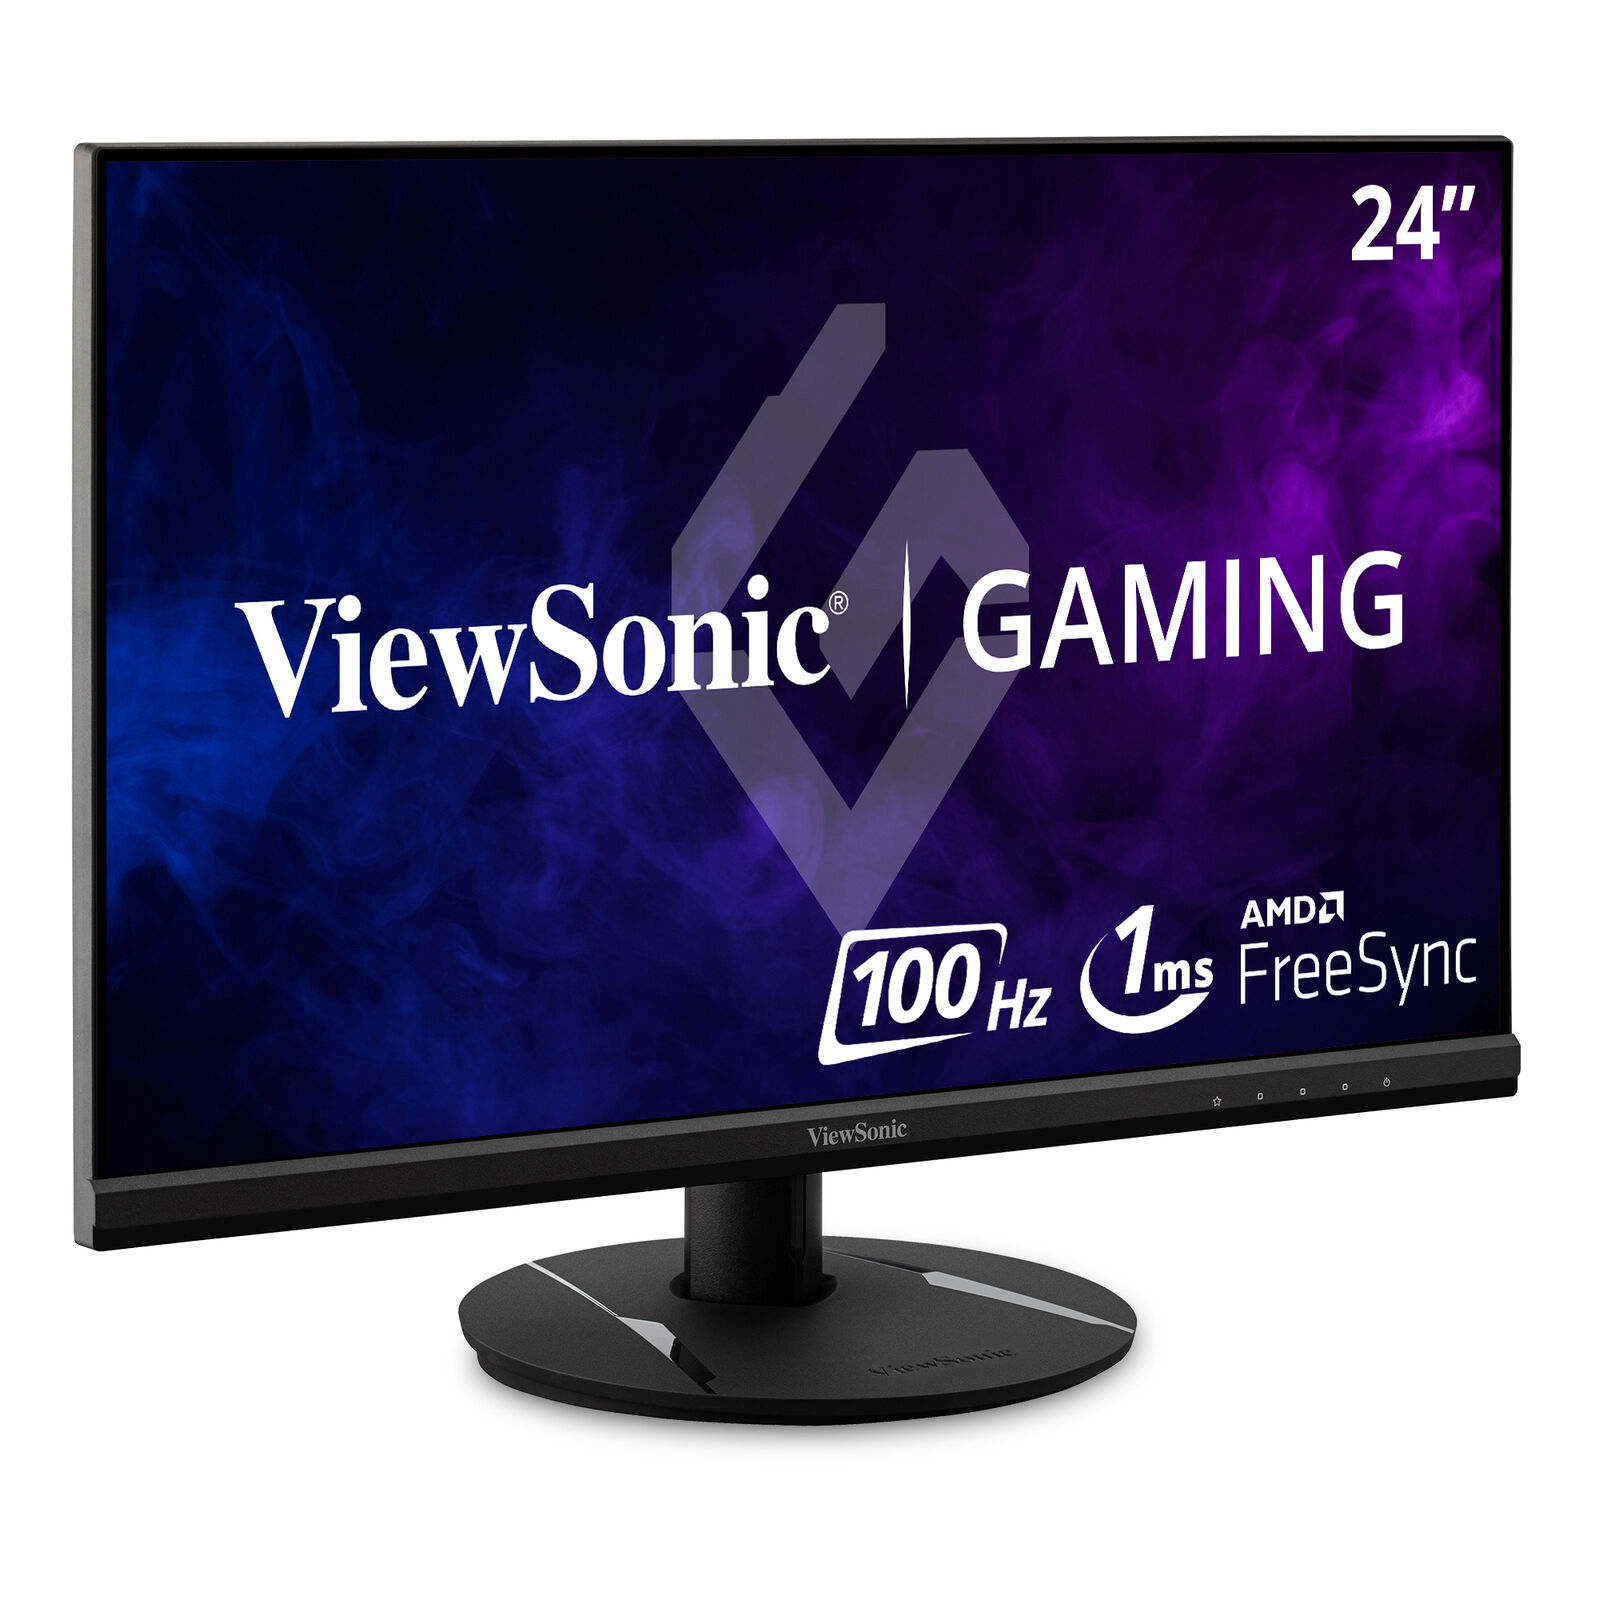 ViewSonic VX2416 IPS Gaming Monitor with 100Hz, 1ms and AMD FreeSync